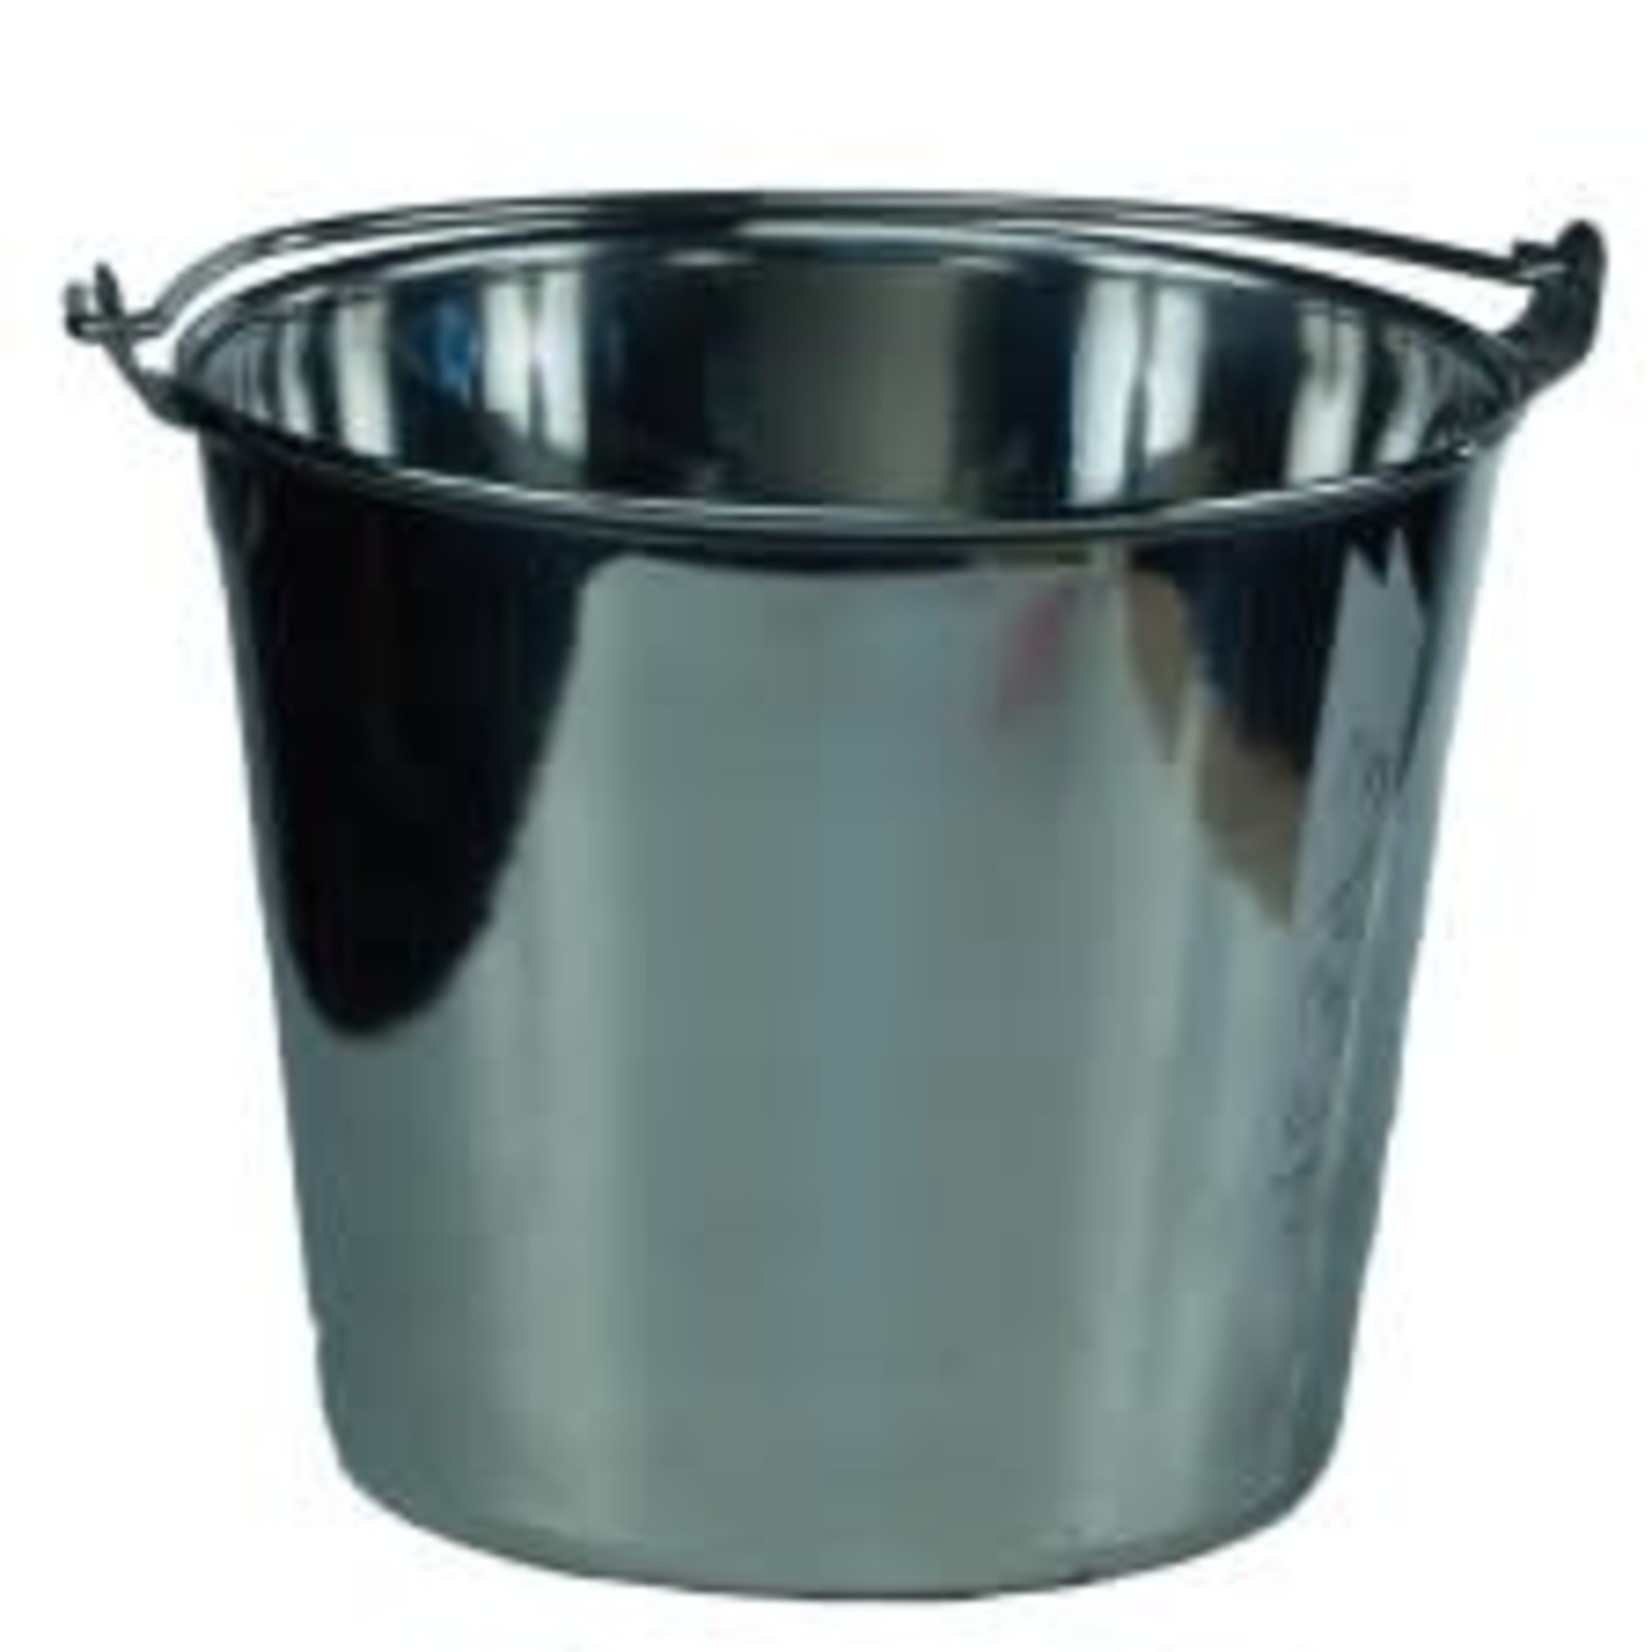 Advance Pet Product Stainless Steel Pail